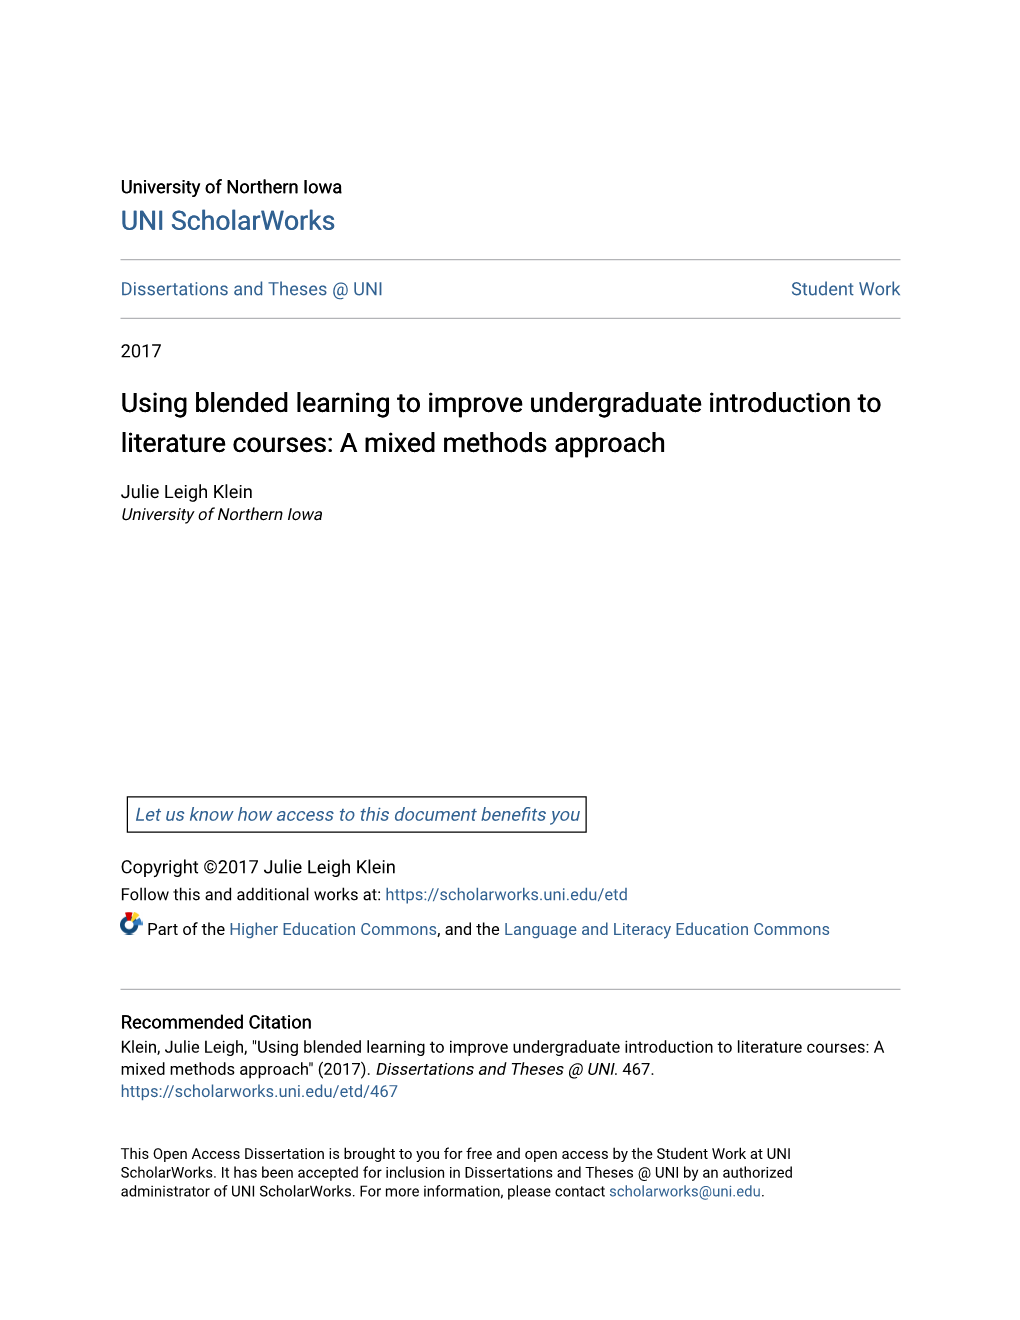 Using Blended Learning to Improve Undergraduate Introduction to Literature Courses: a Mixed Methods Approach